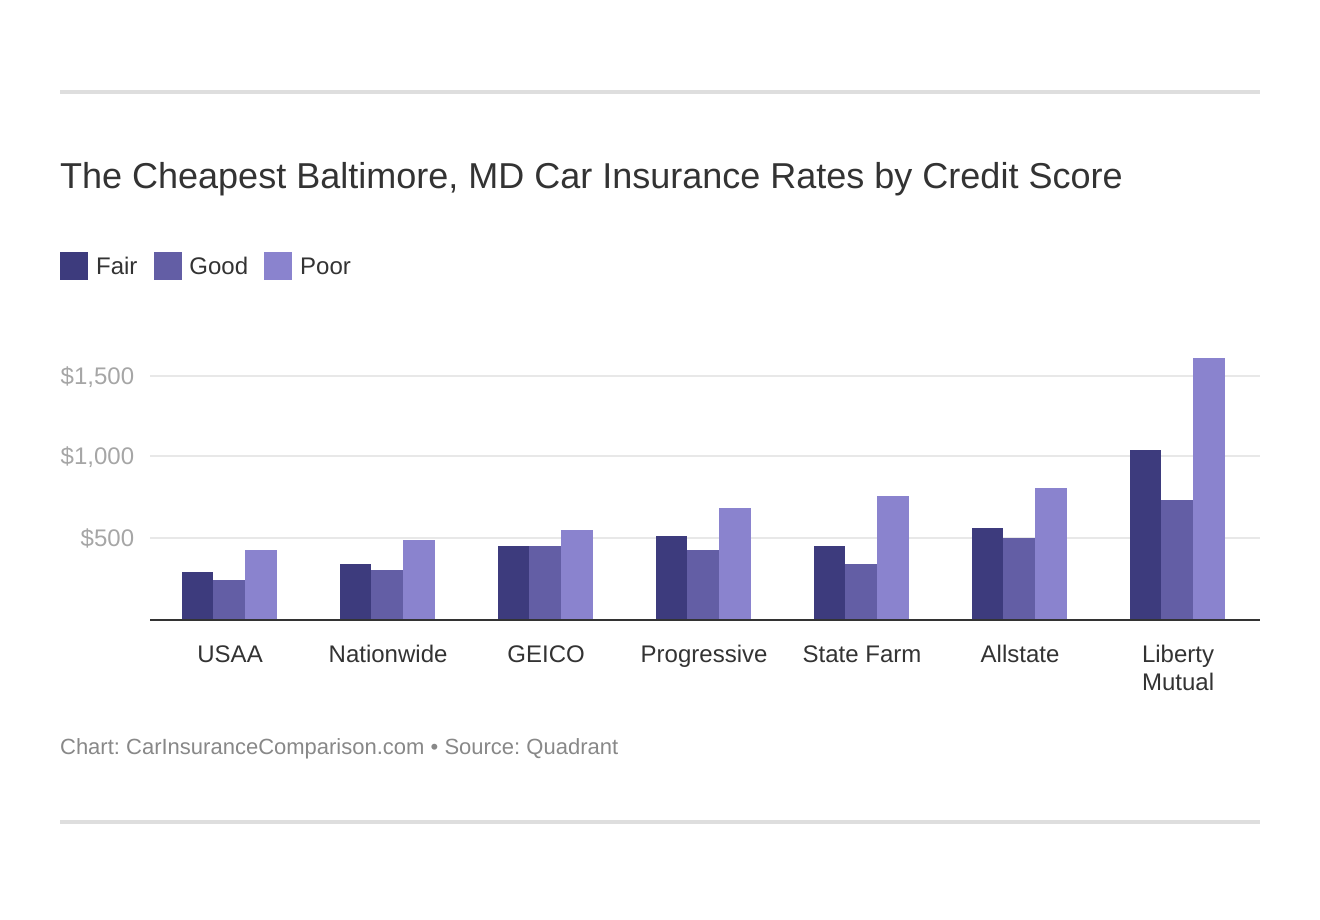 The Cheapest Baltimore, MD Car Insurance Rates by Credit Score